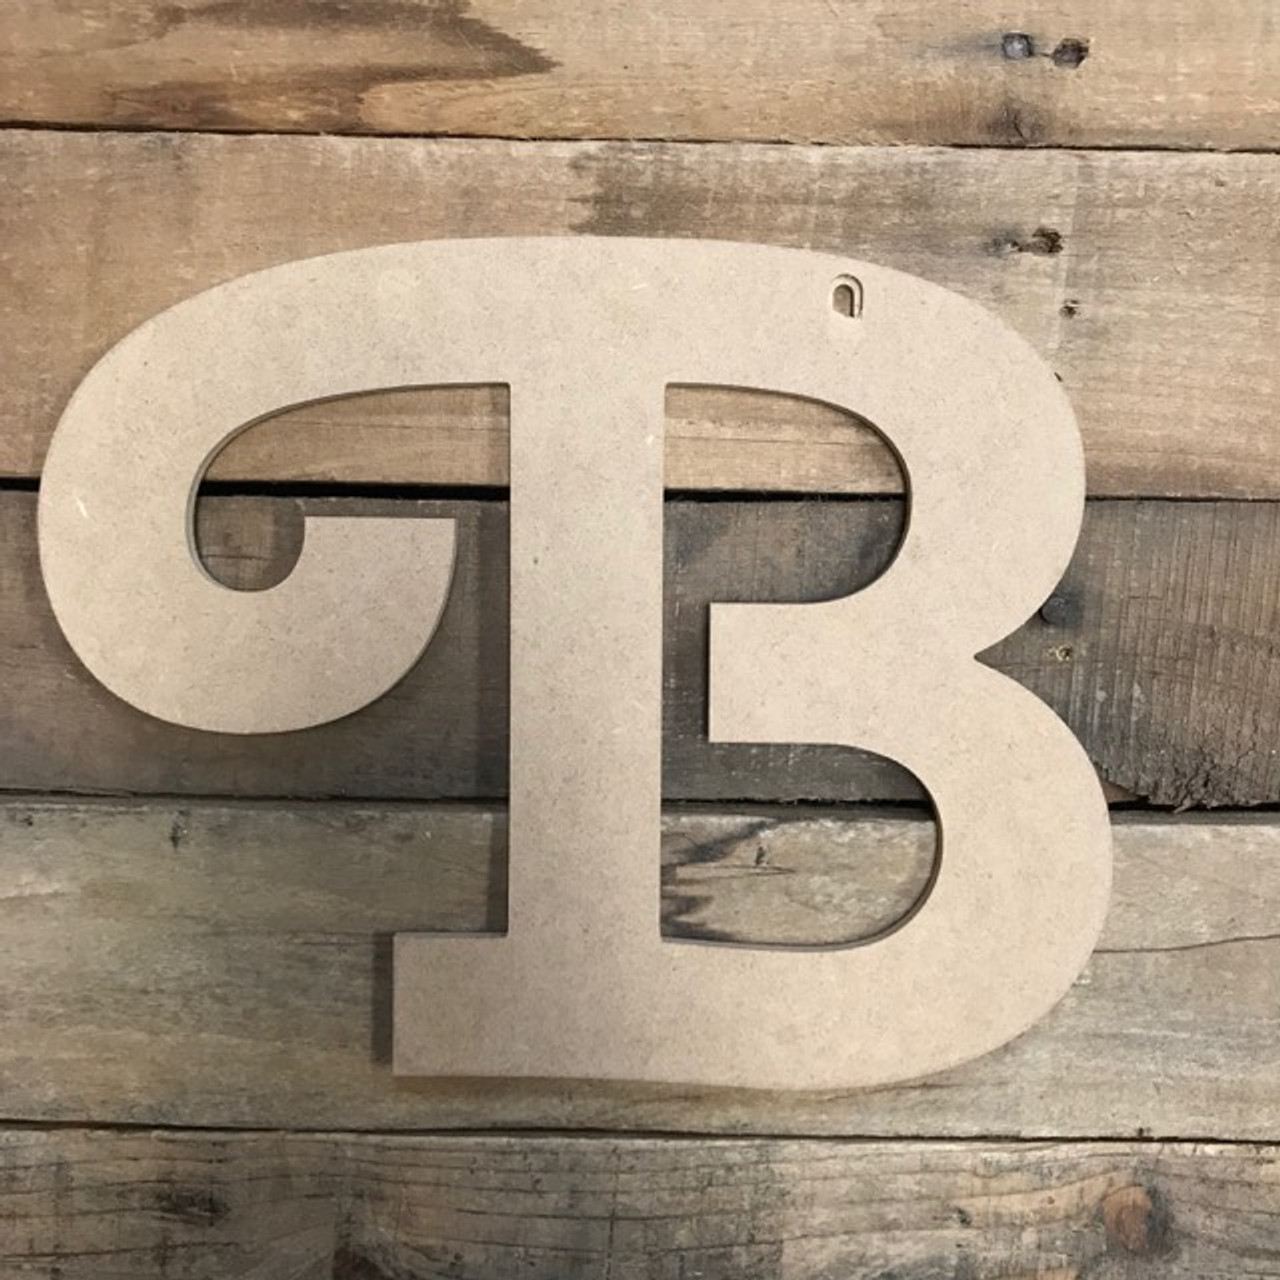 Unfinished Wood, 12-in, 2-in Thick, Letter, Letter B